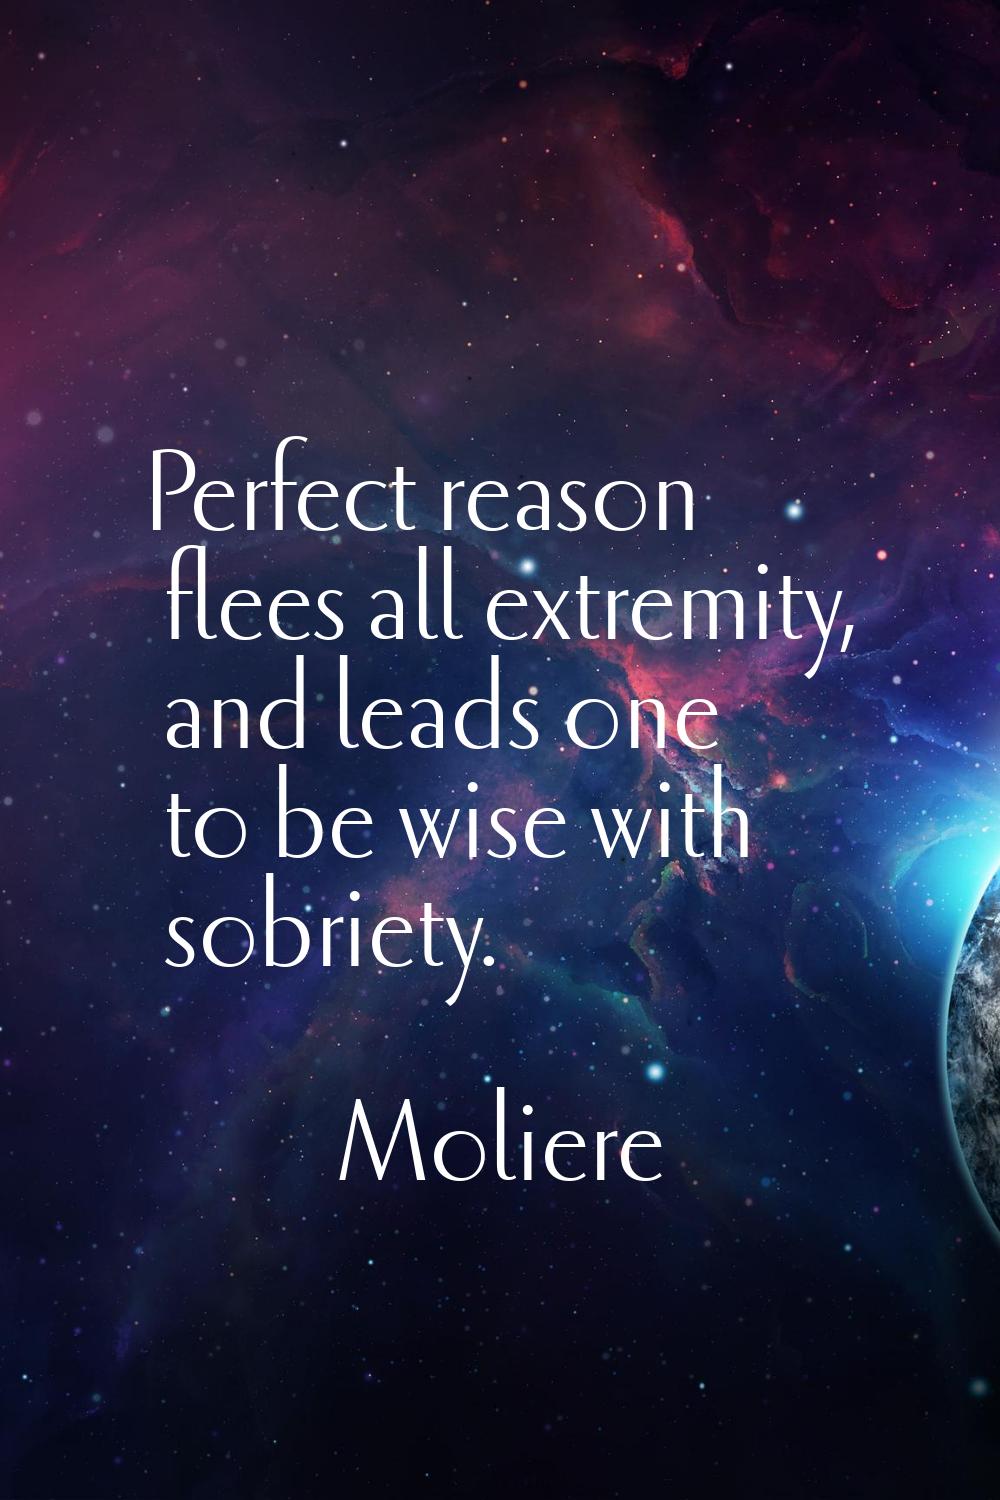 Perfect reason flees all extremity, and leads one to be wise with sobriety.